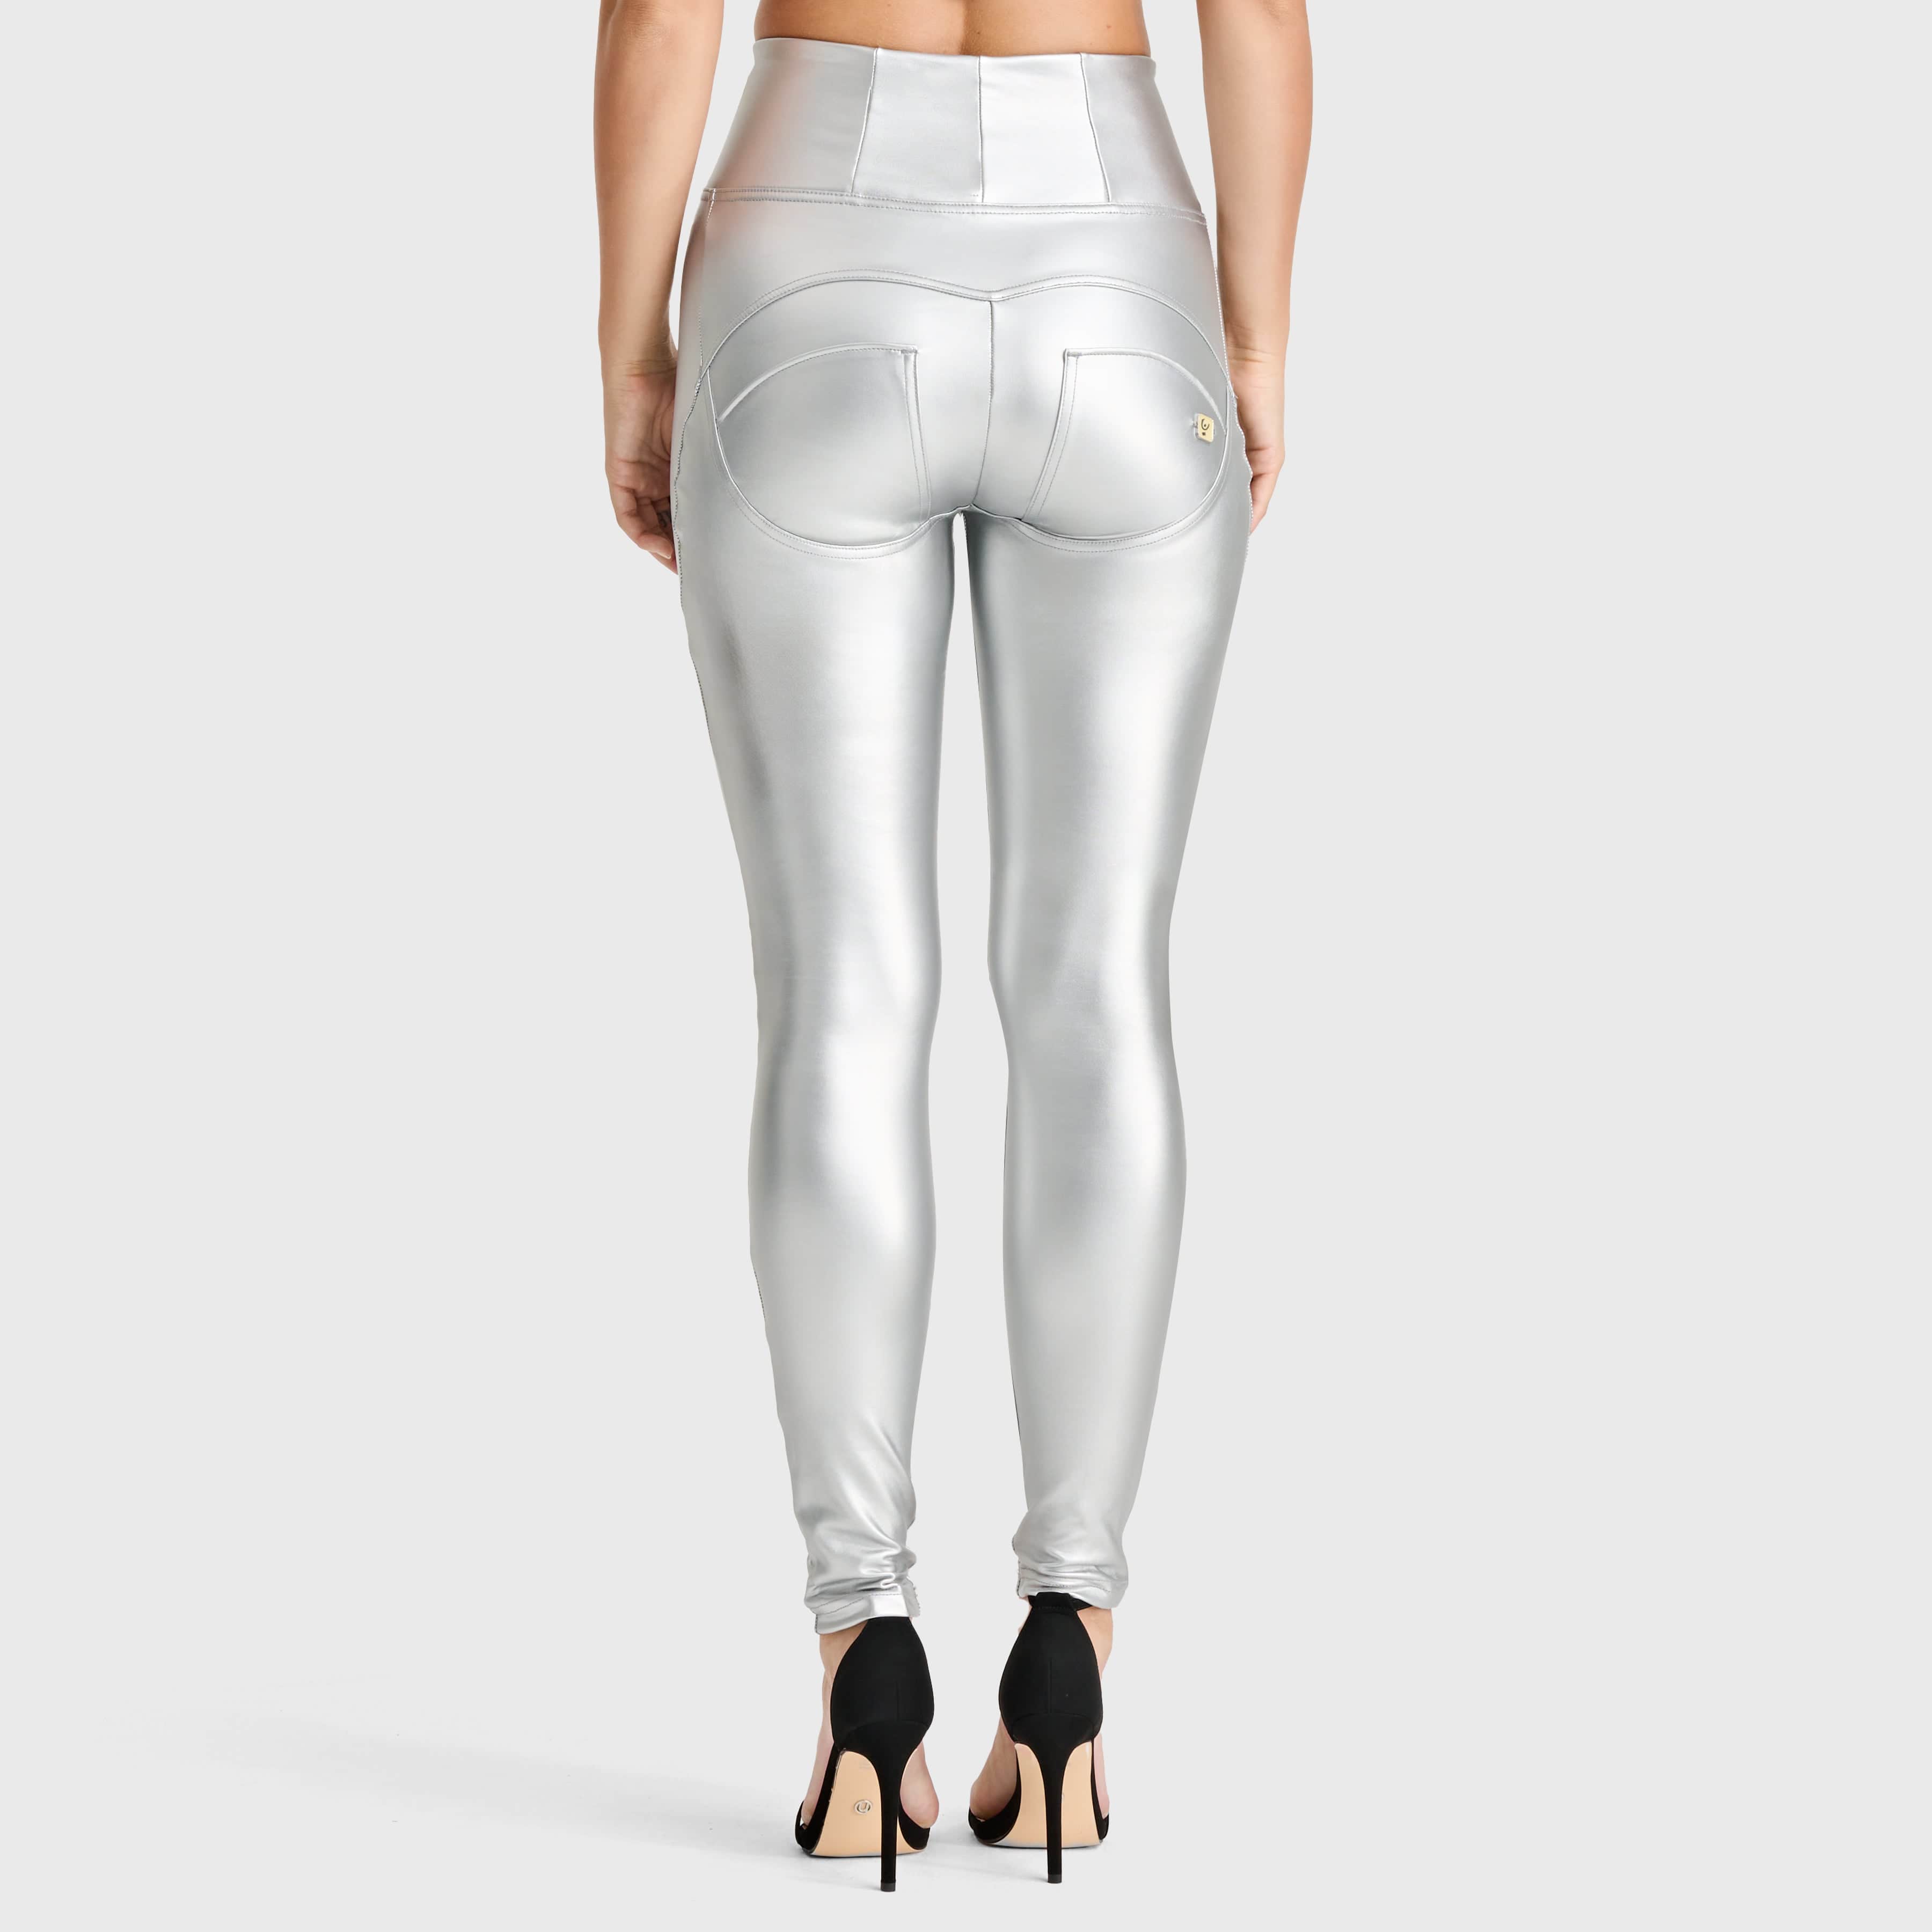 WR.UP® Faux Leather - Super High Waisted - Full Length - Silver 3